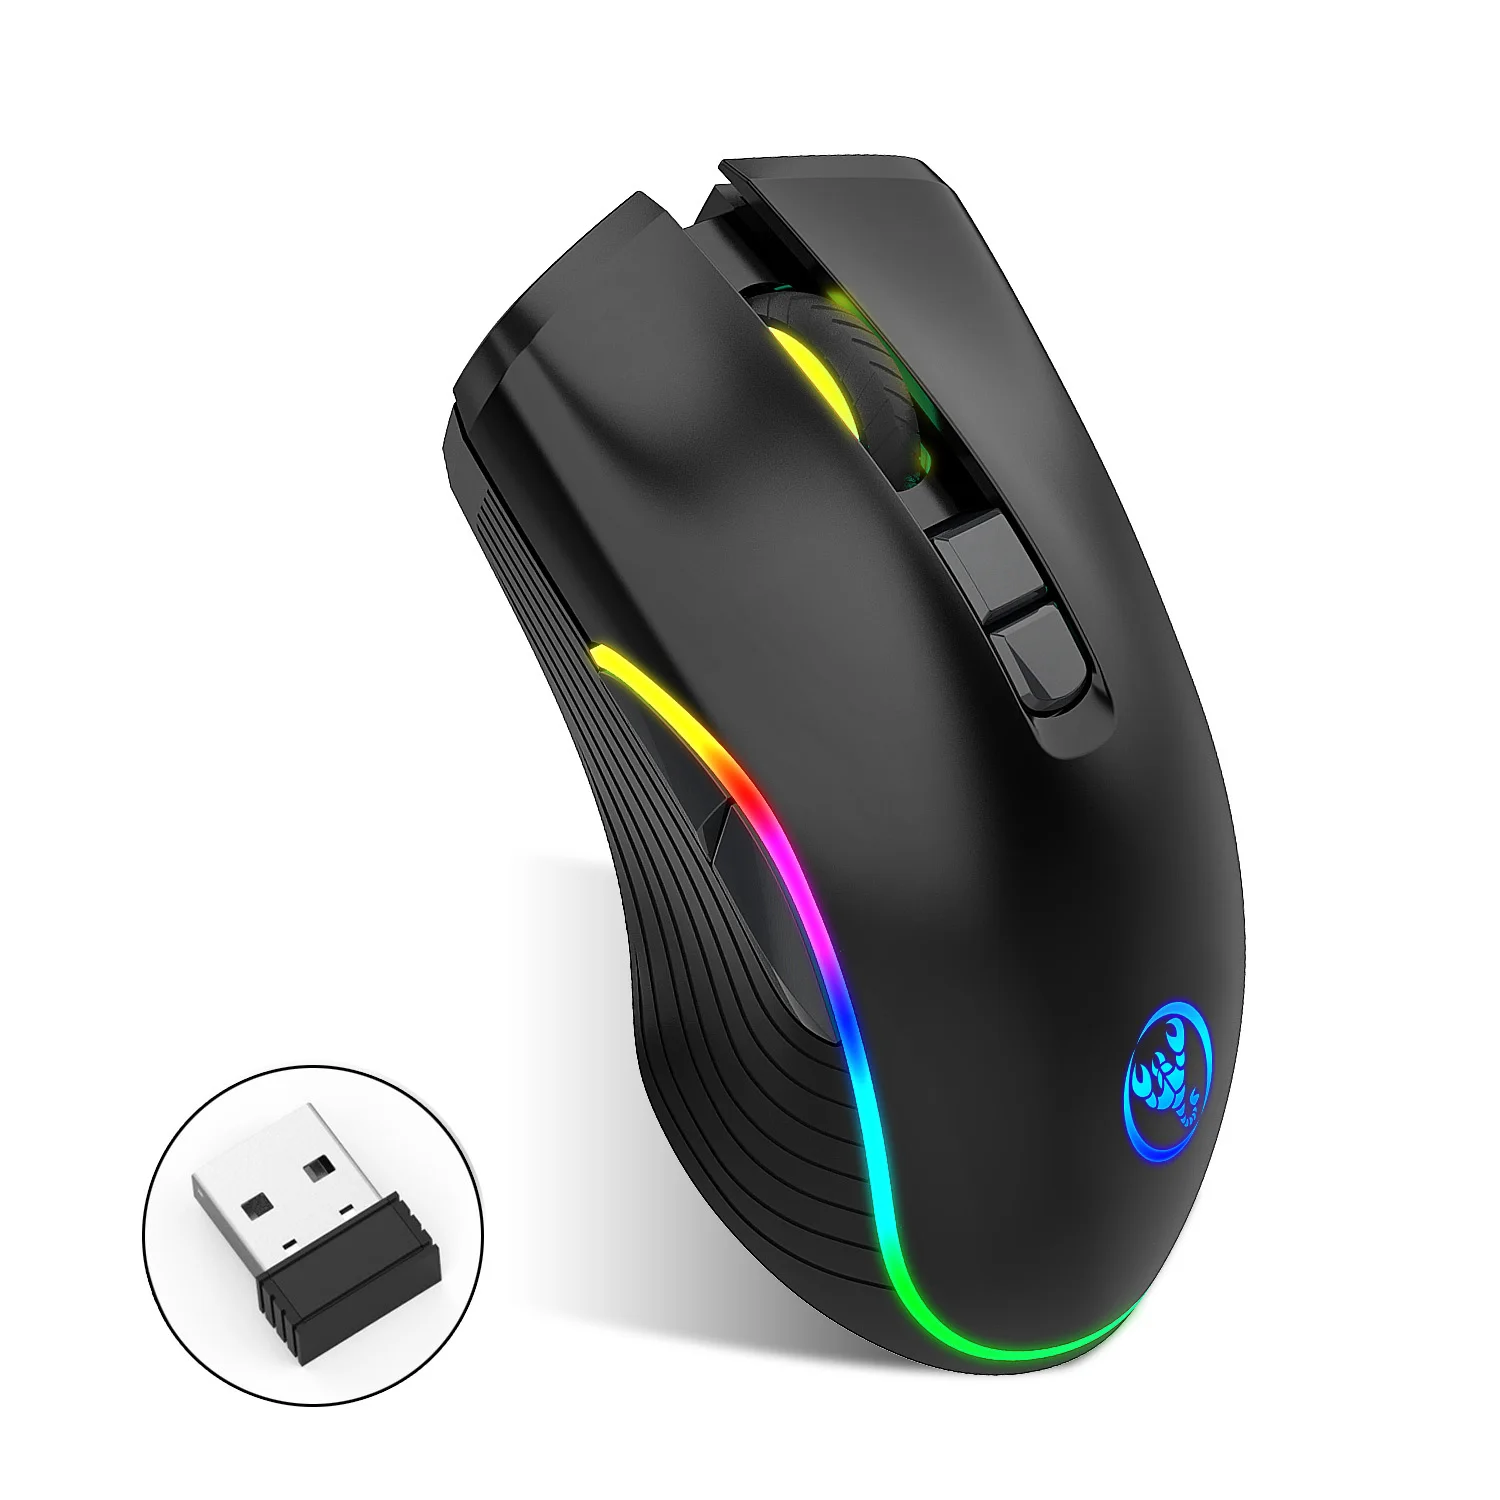 

T26 2.4G Wireless TYPE-C Fast Charge Mice 2400DPI 7 Keys Rechargeable Eergonomic Optical RGB Light Gaming Mouse for PC Laptop